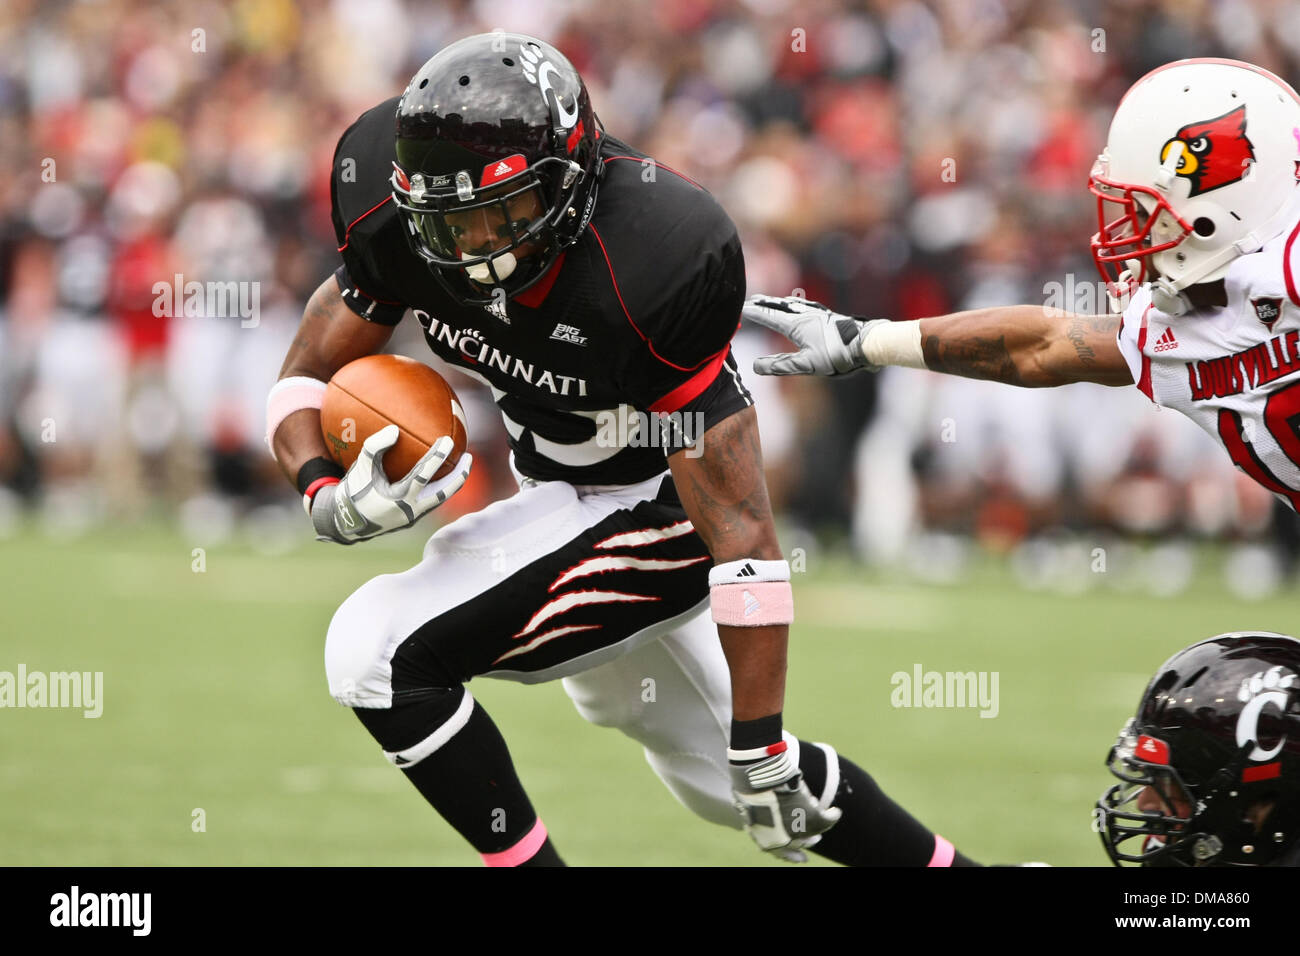 24 October 2009:Cincinnati running back Isaiah Pead #23 in game action during the first half of play of the NCAA game between the Louisville Cardinals and the Cincinnati Bearcats played at Nippert Stadium in Cincinnati, OH  (Credit Image: © Southcreek Global/ZUMApress.com) Stock Photo